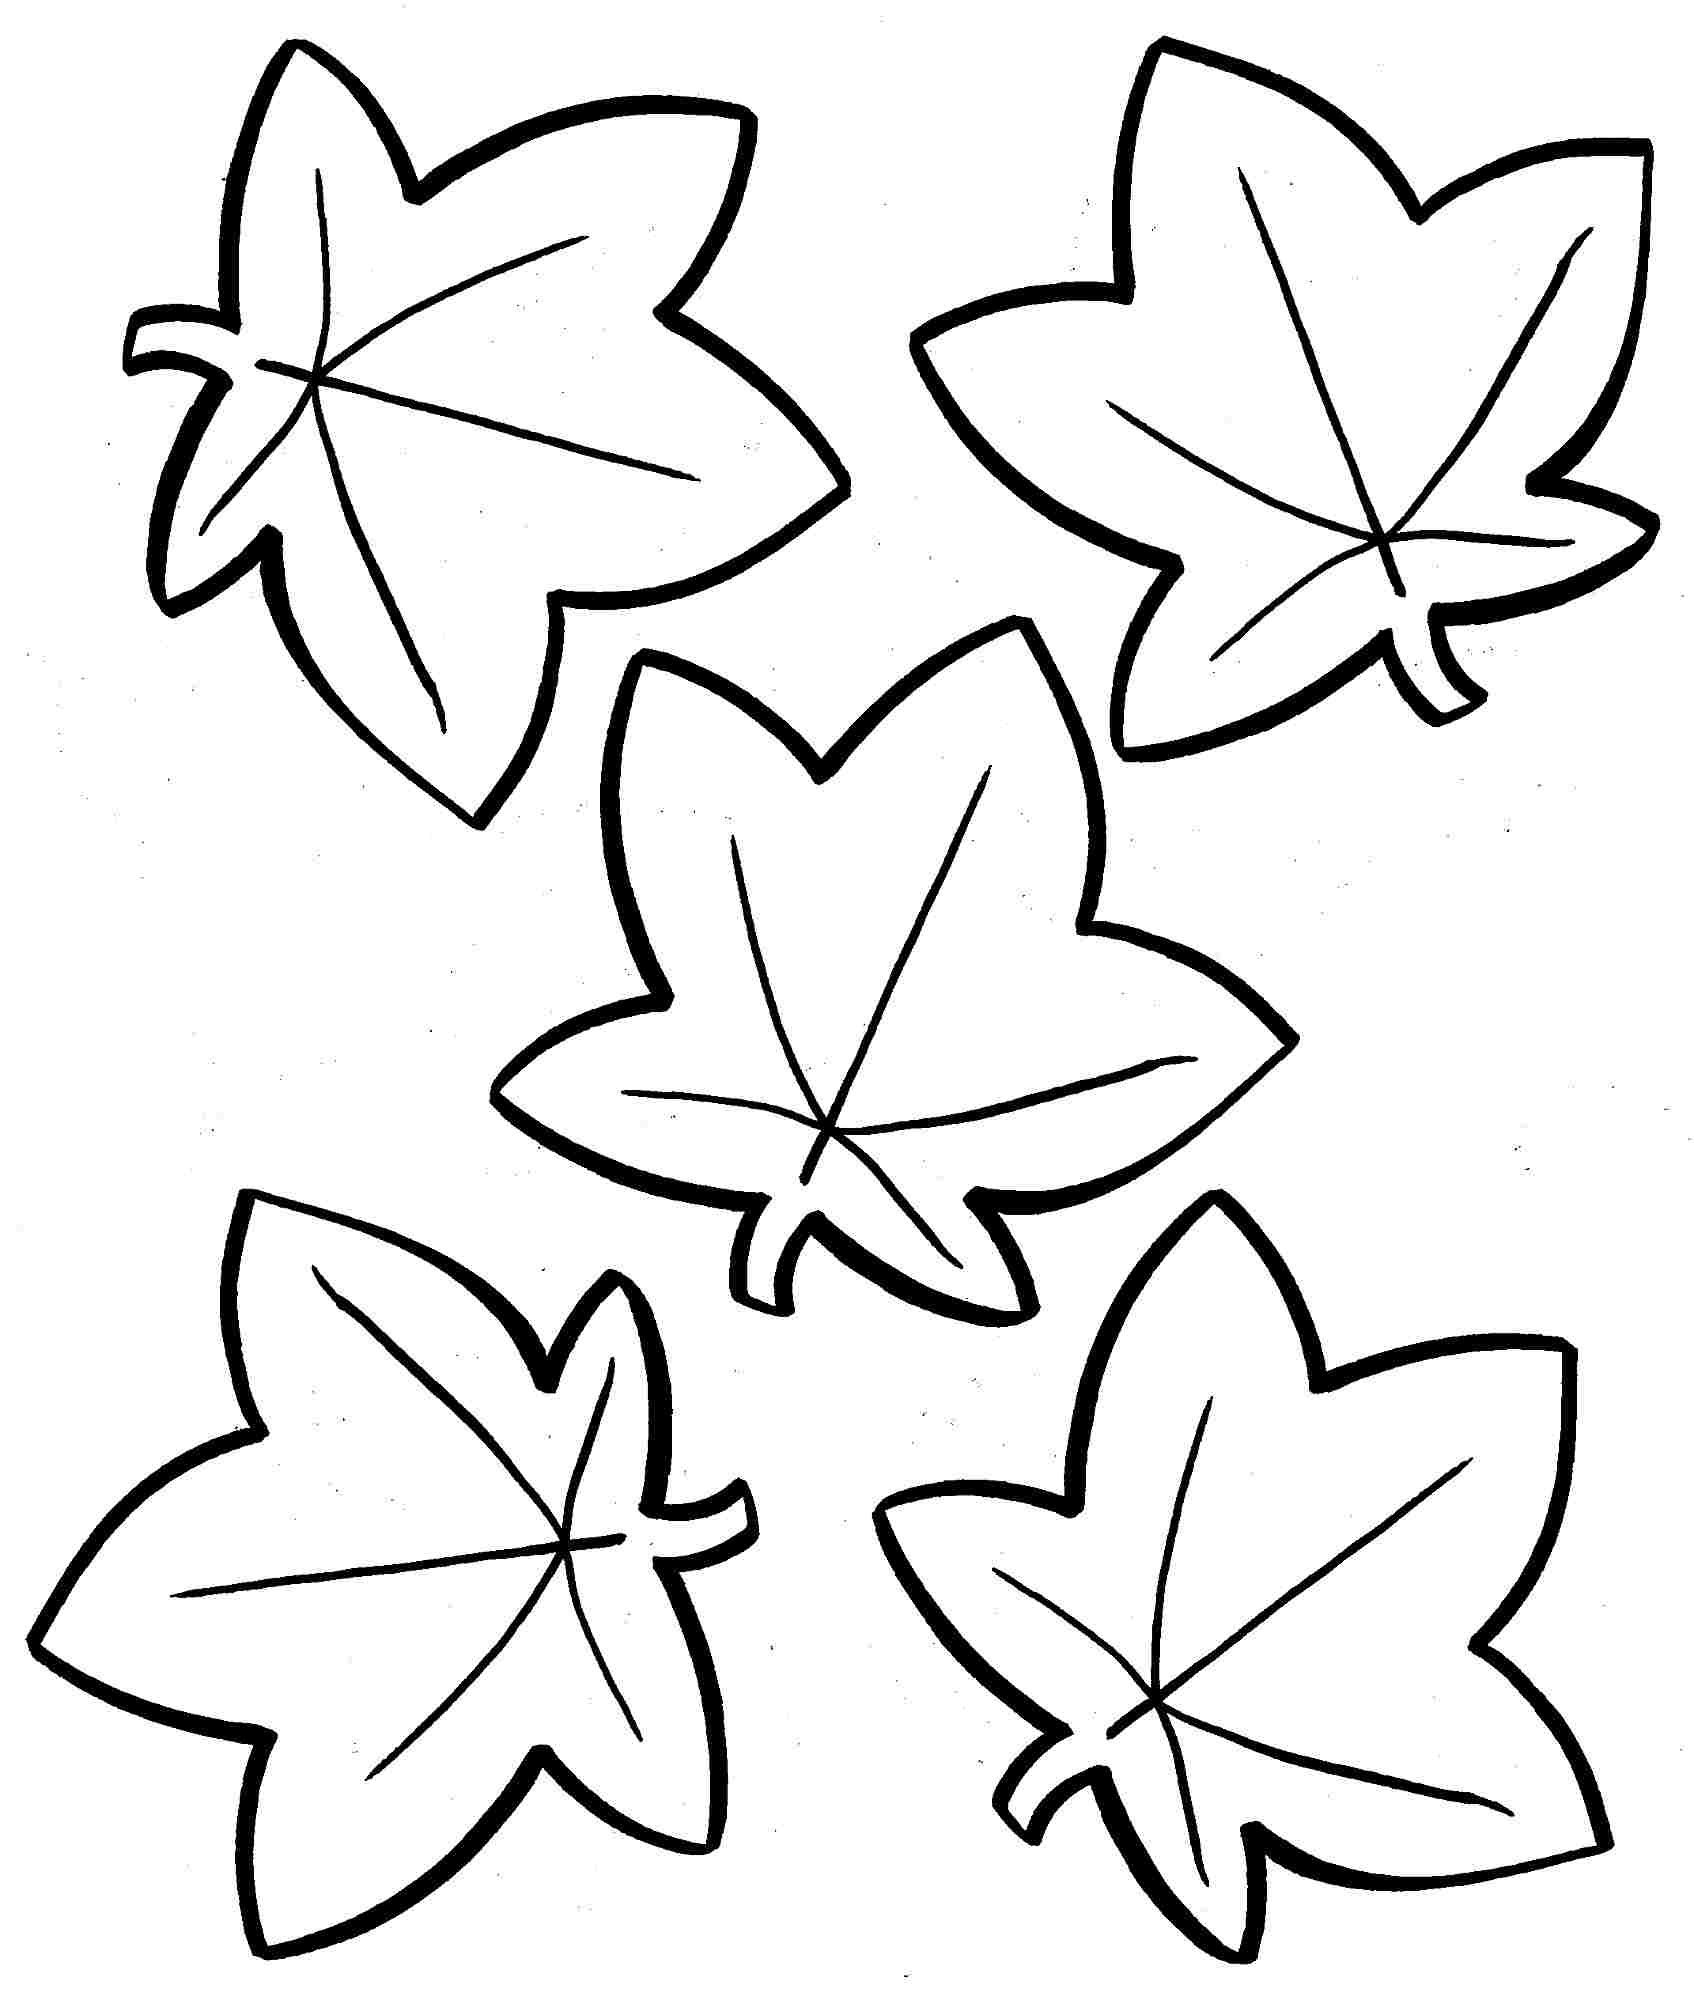 19 Free Pictures for: Fall Leaf Coloring Pages. Temoon.us